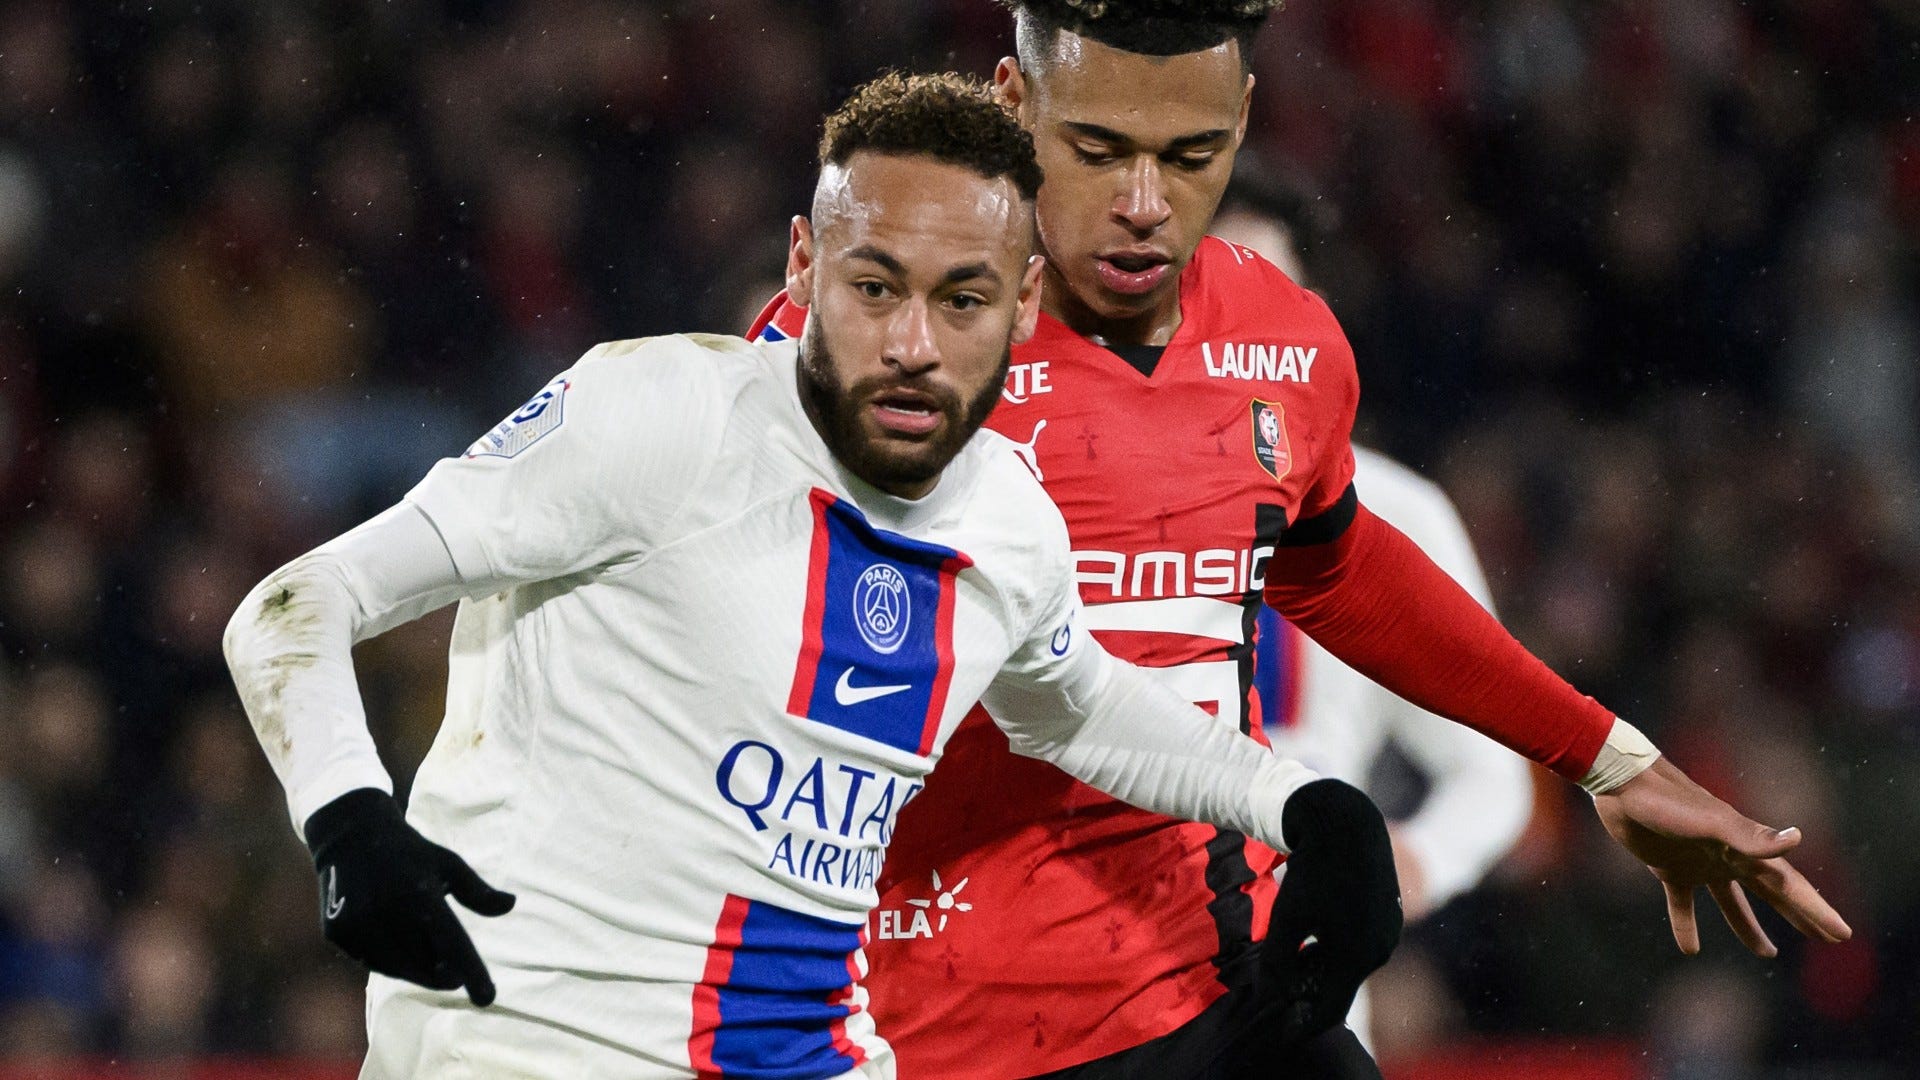 Monaco vs PSG Live stream, TV channel, kick-off time and where to watch Goal India